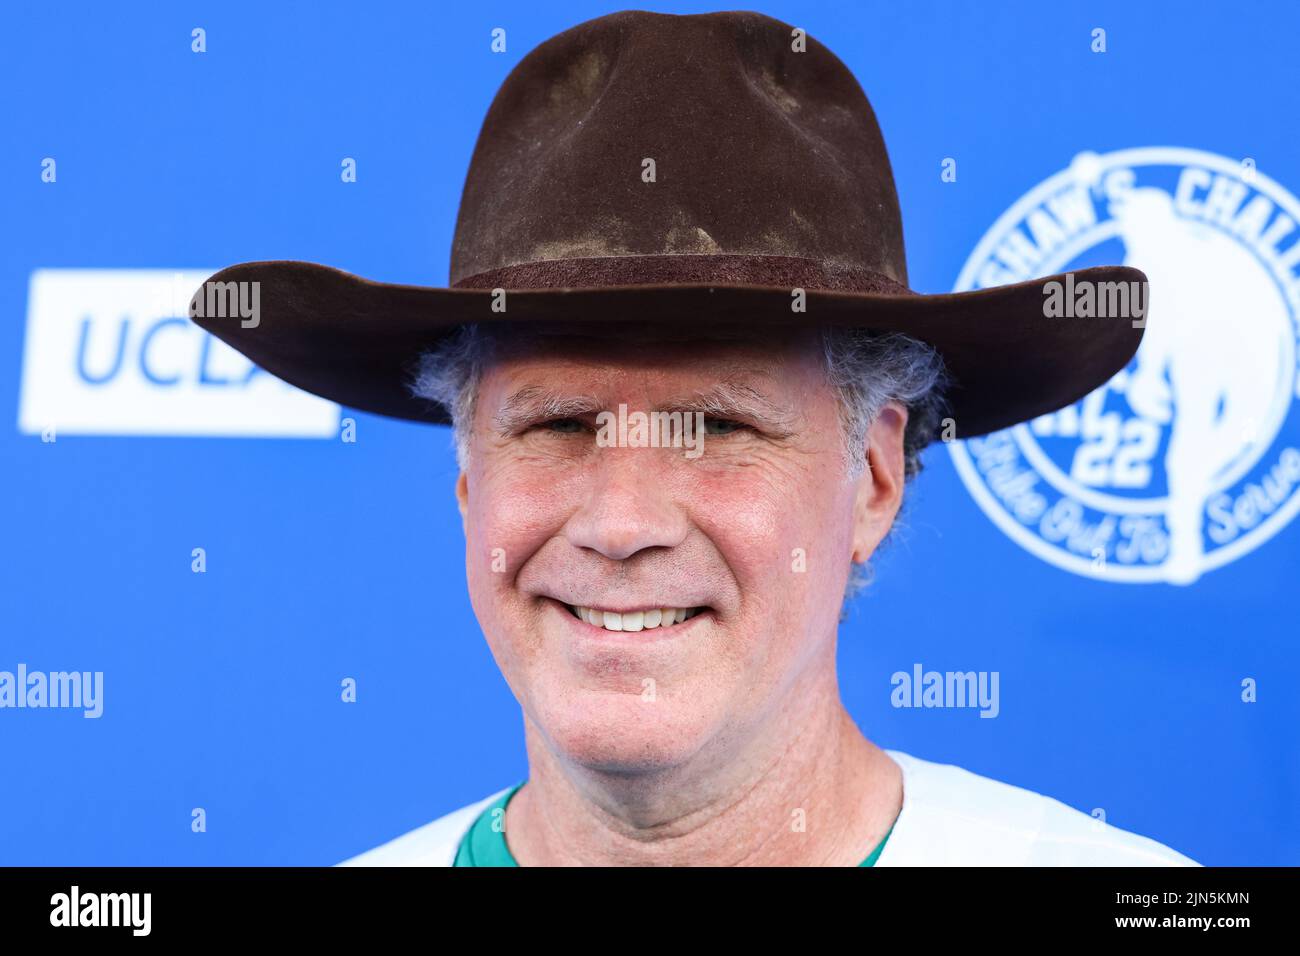 Los Angeles, United States. 08th Aug, 2022. ELYSIAN PARK, LOS ANGELES, CALIFORNIA, USA - AUGUST 08: American actor Will Ferrell arrives at Kershaw's Challenge Ping Pong 4 Purpose 2022 held at Dodger Stadium on August 8, 2022 in Elysian Park, Los Angeles, California, United States. (Photo by Xavier Collin/Image Press Agency) Credit: Image Press Agency/Alamy Live News Stock Photo